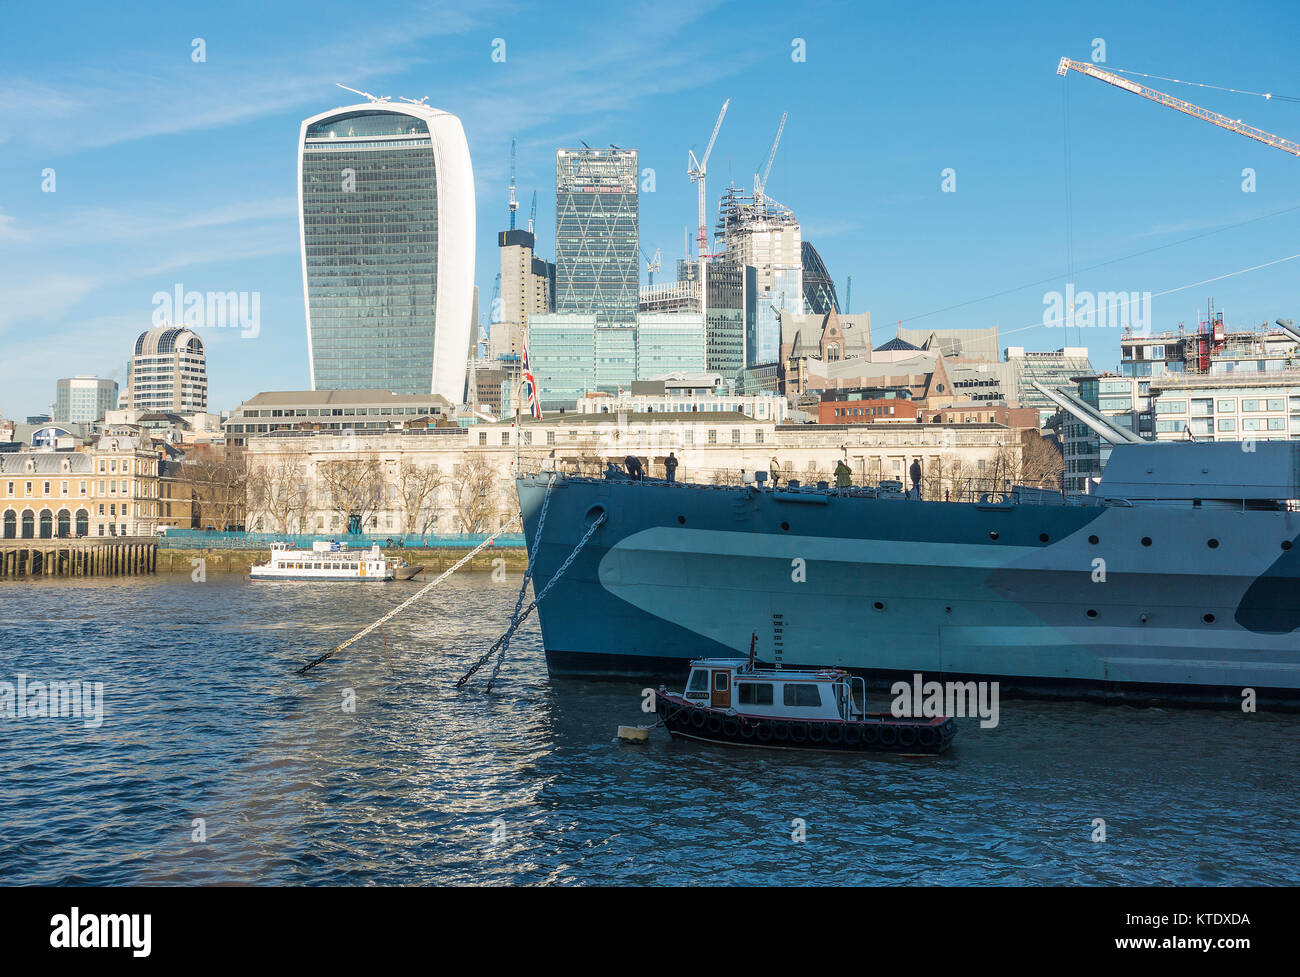 The City of London Skyline with HMS Belfast and the River Thames London England United Kingdom UK Stock Photo